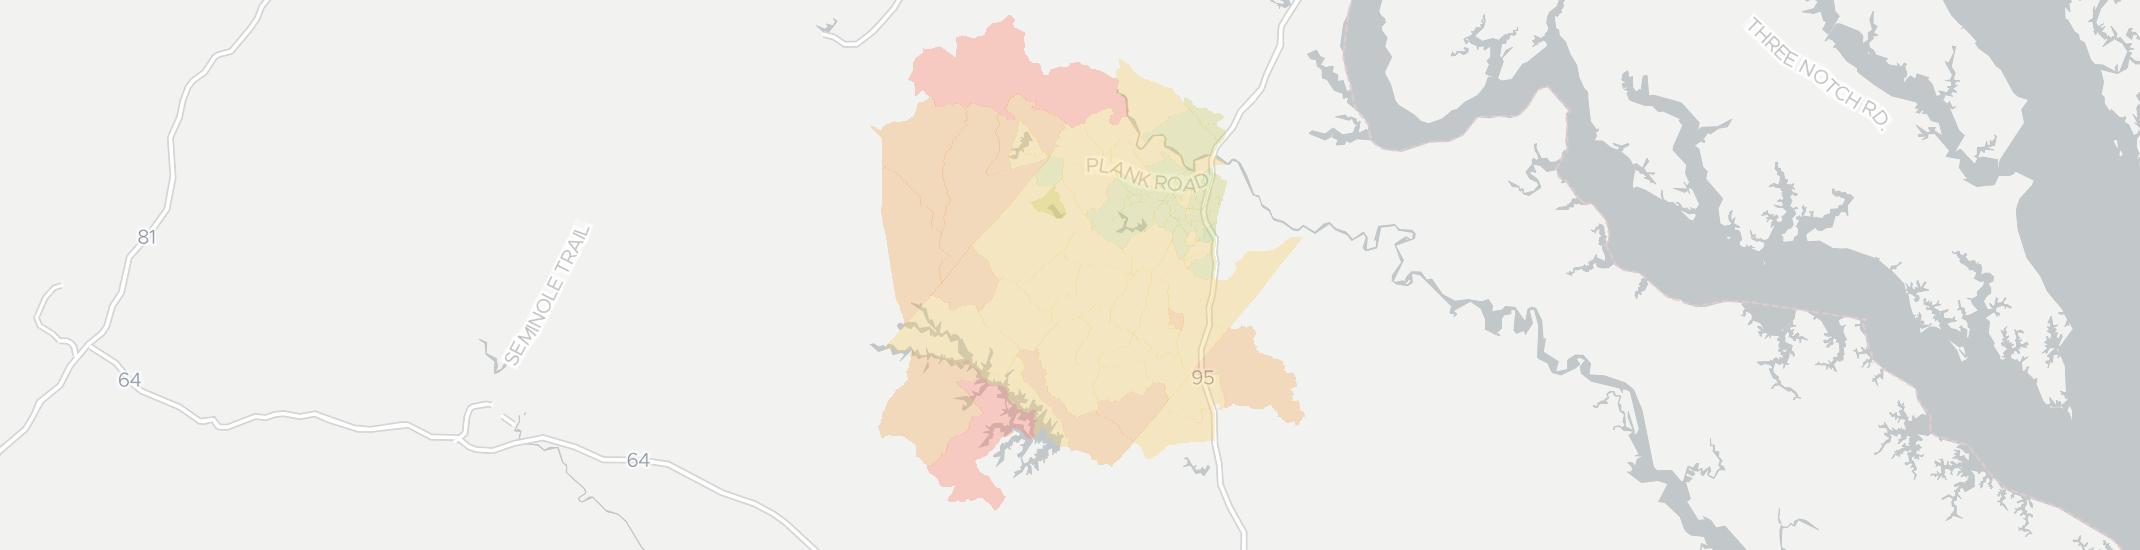 Spotsylvania Internet Competition Map. Click for interactive map.